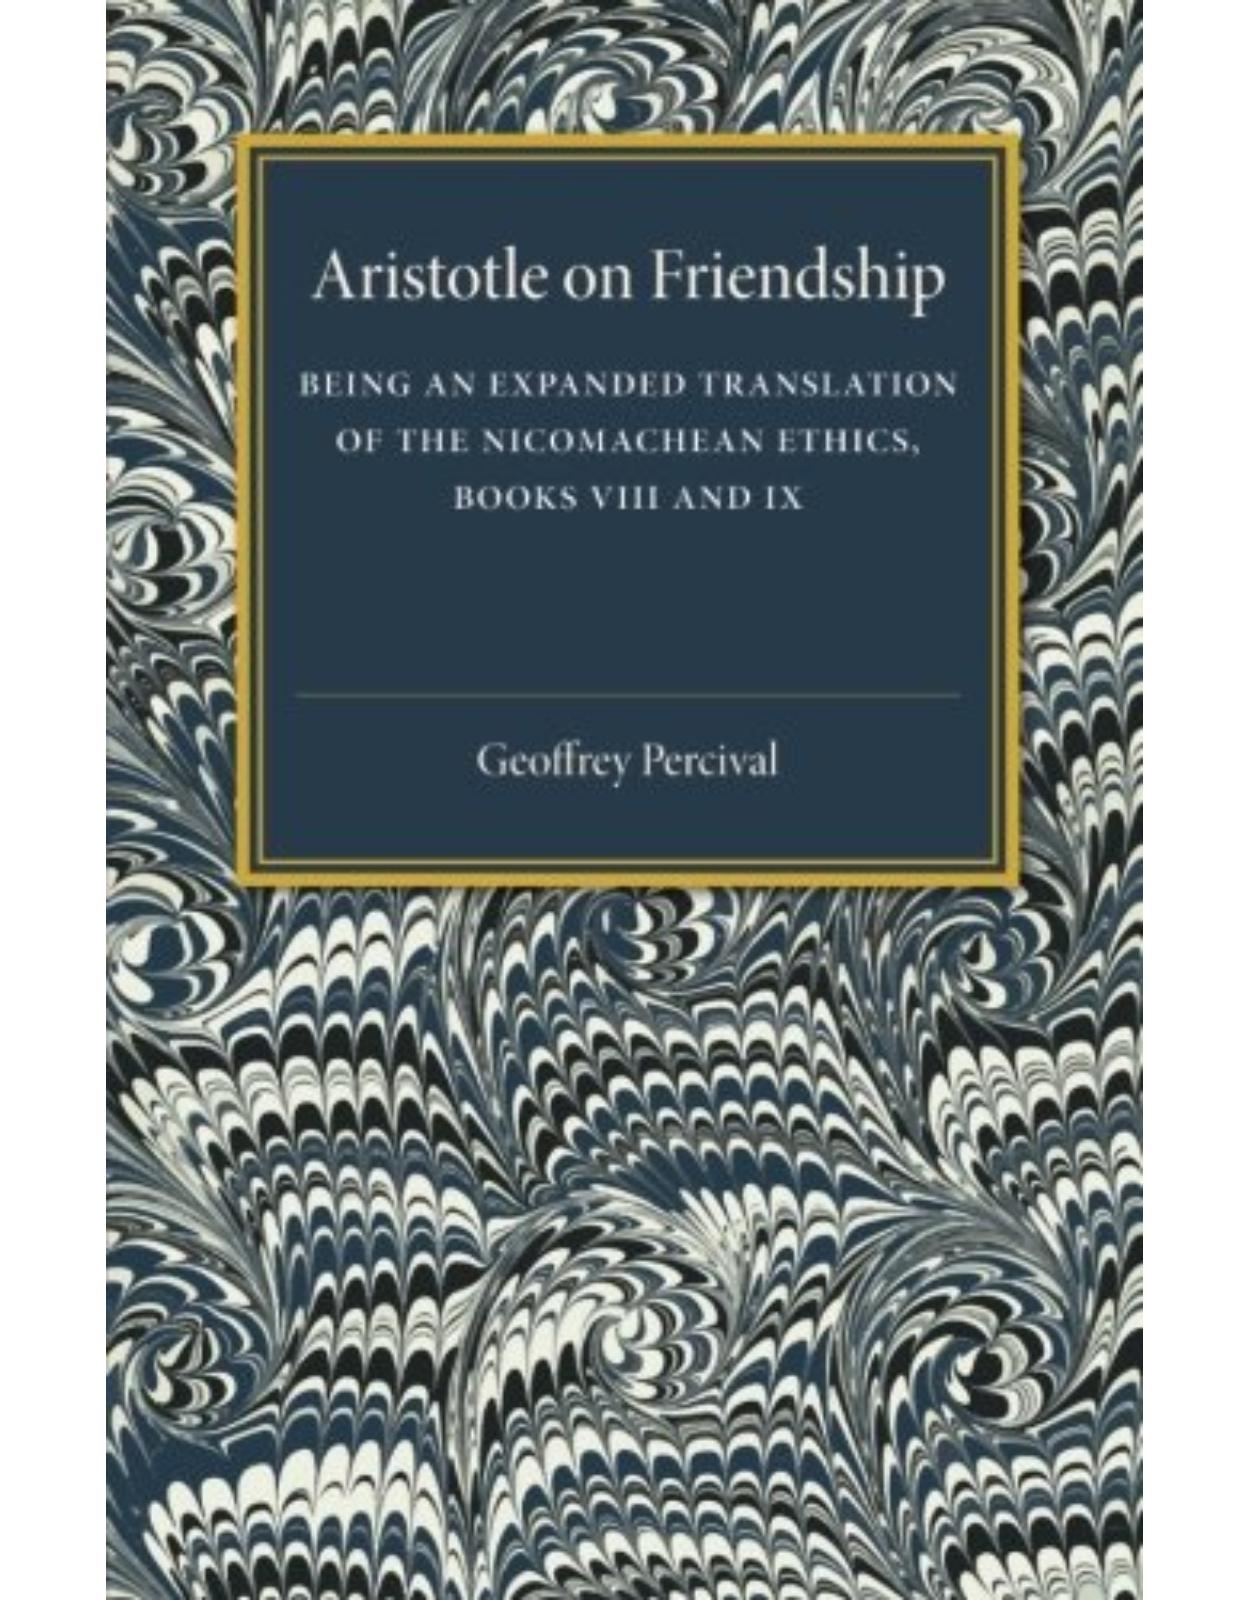 Aristotle on Friendship: Being an Expanded Translation of the Nicomachean Ethics Books VIII and IX